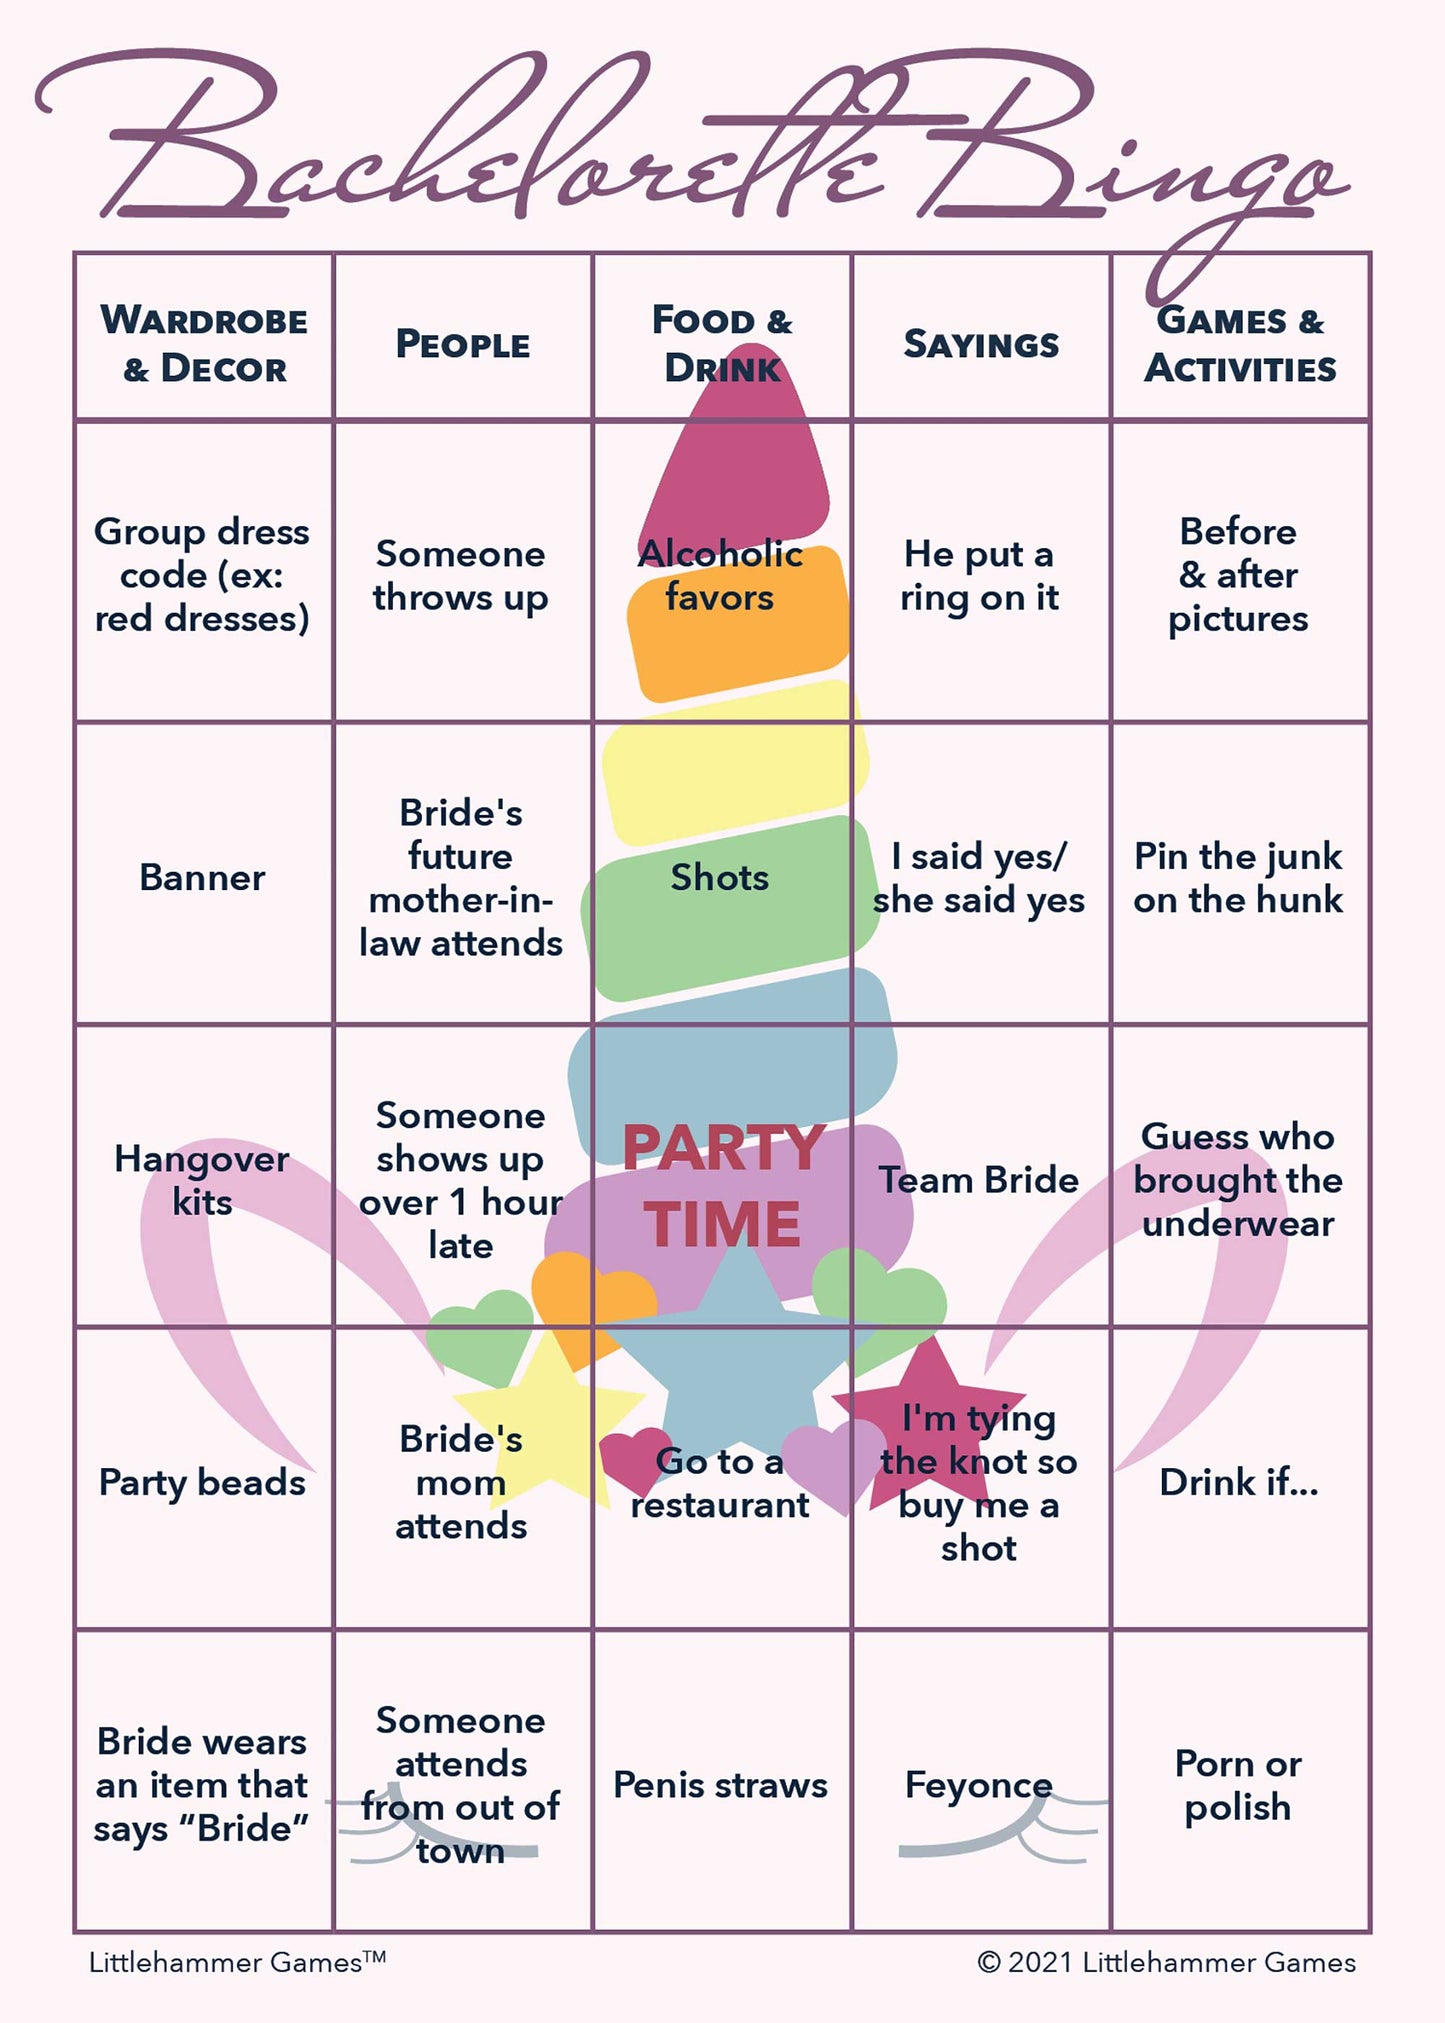 Bachelorette Bingo game card with a unicorn-themed background